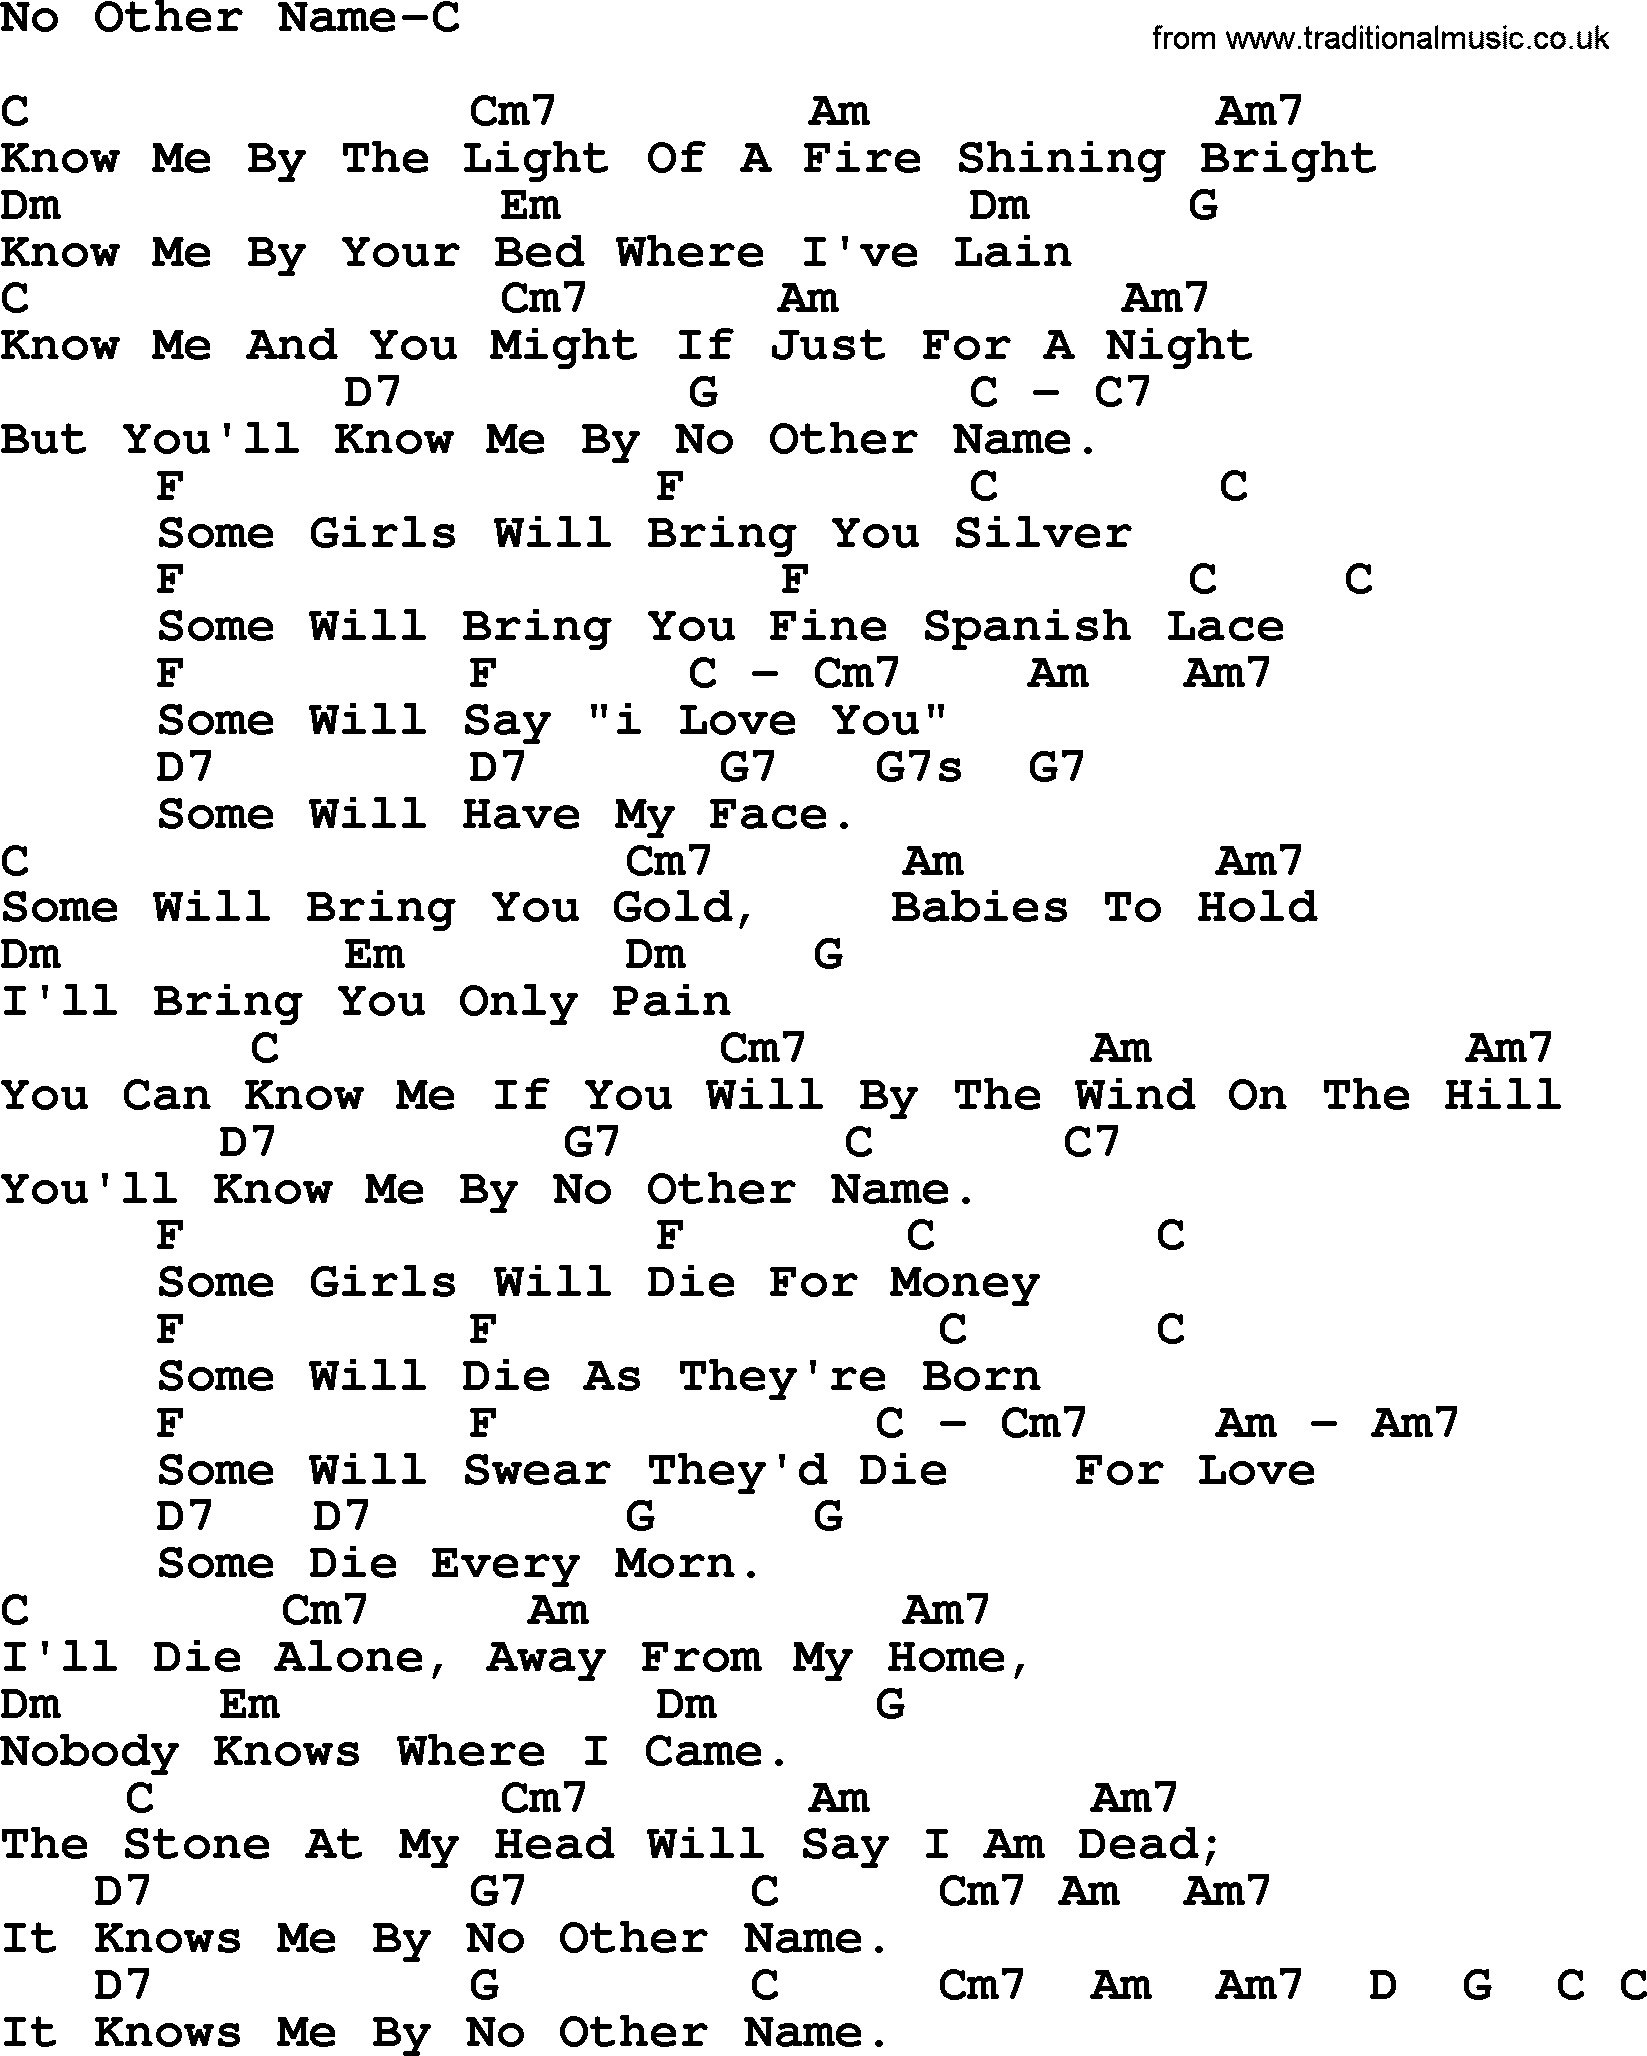 Peter, Paul and Mary song No Other Name C, lyrics and chords